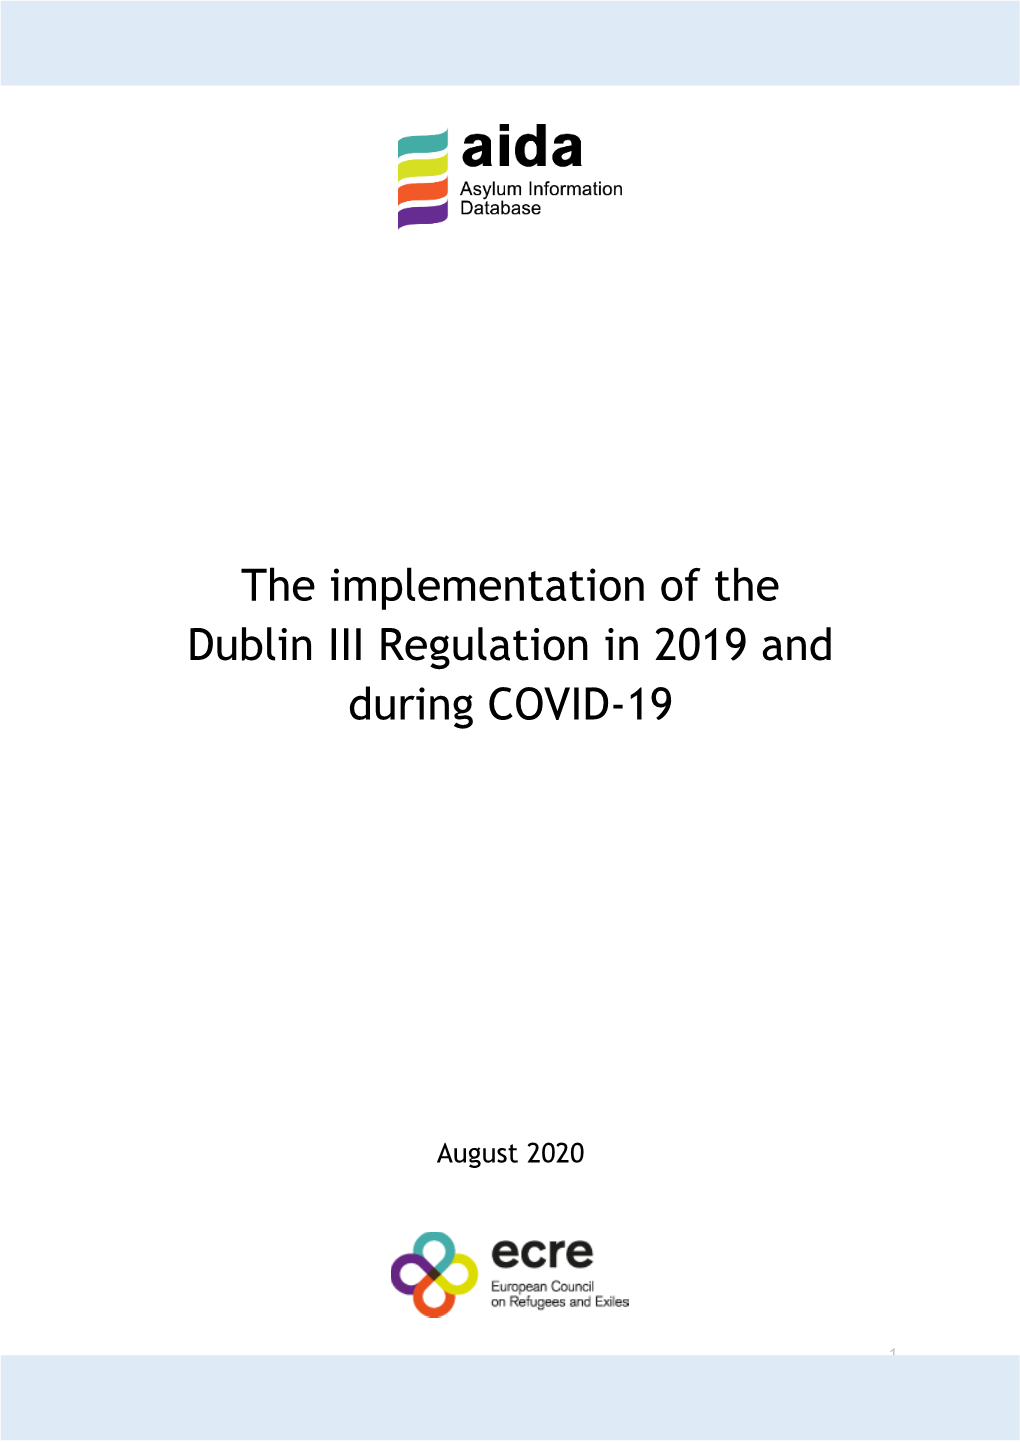 The Implementation of the Dublin III Regulation in 2019 and During COVID-19